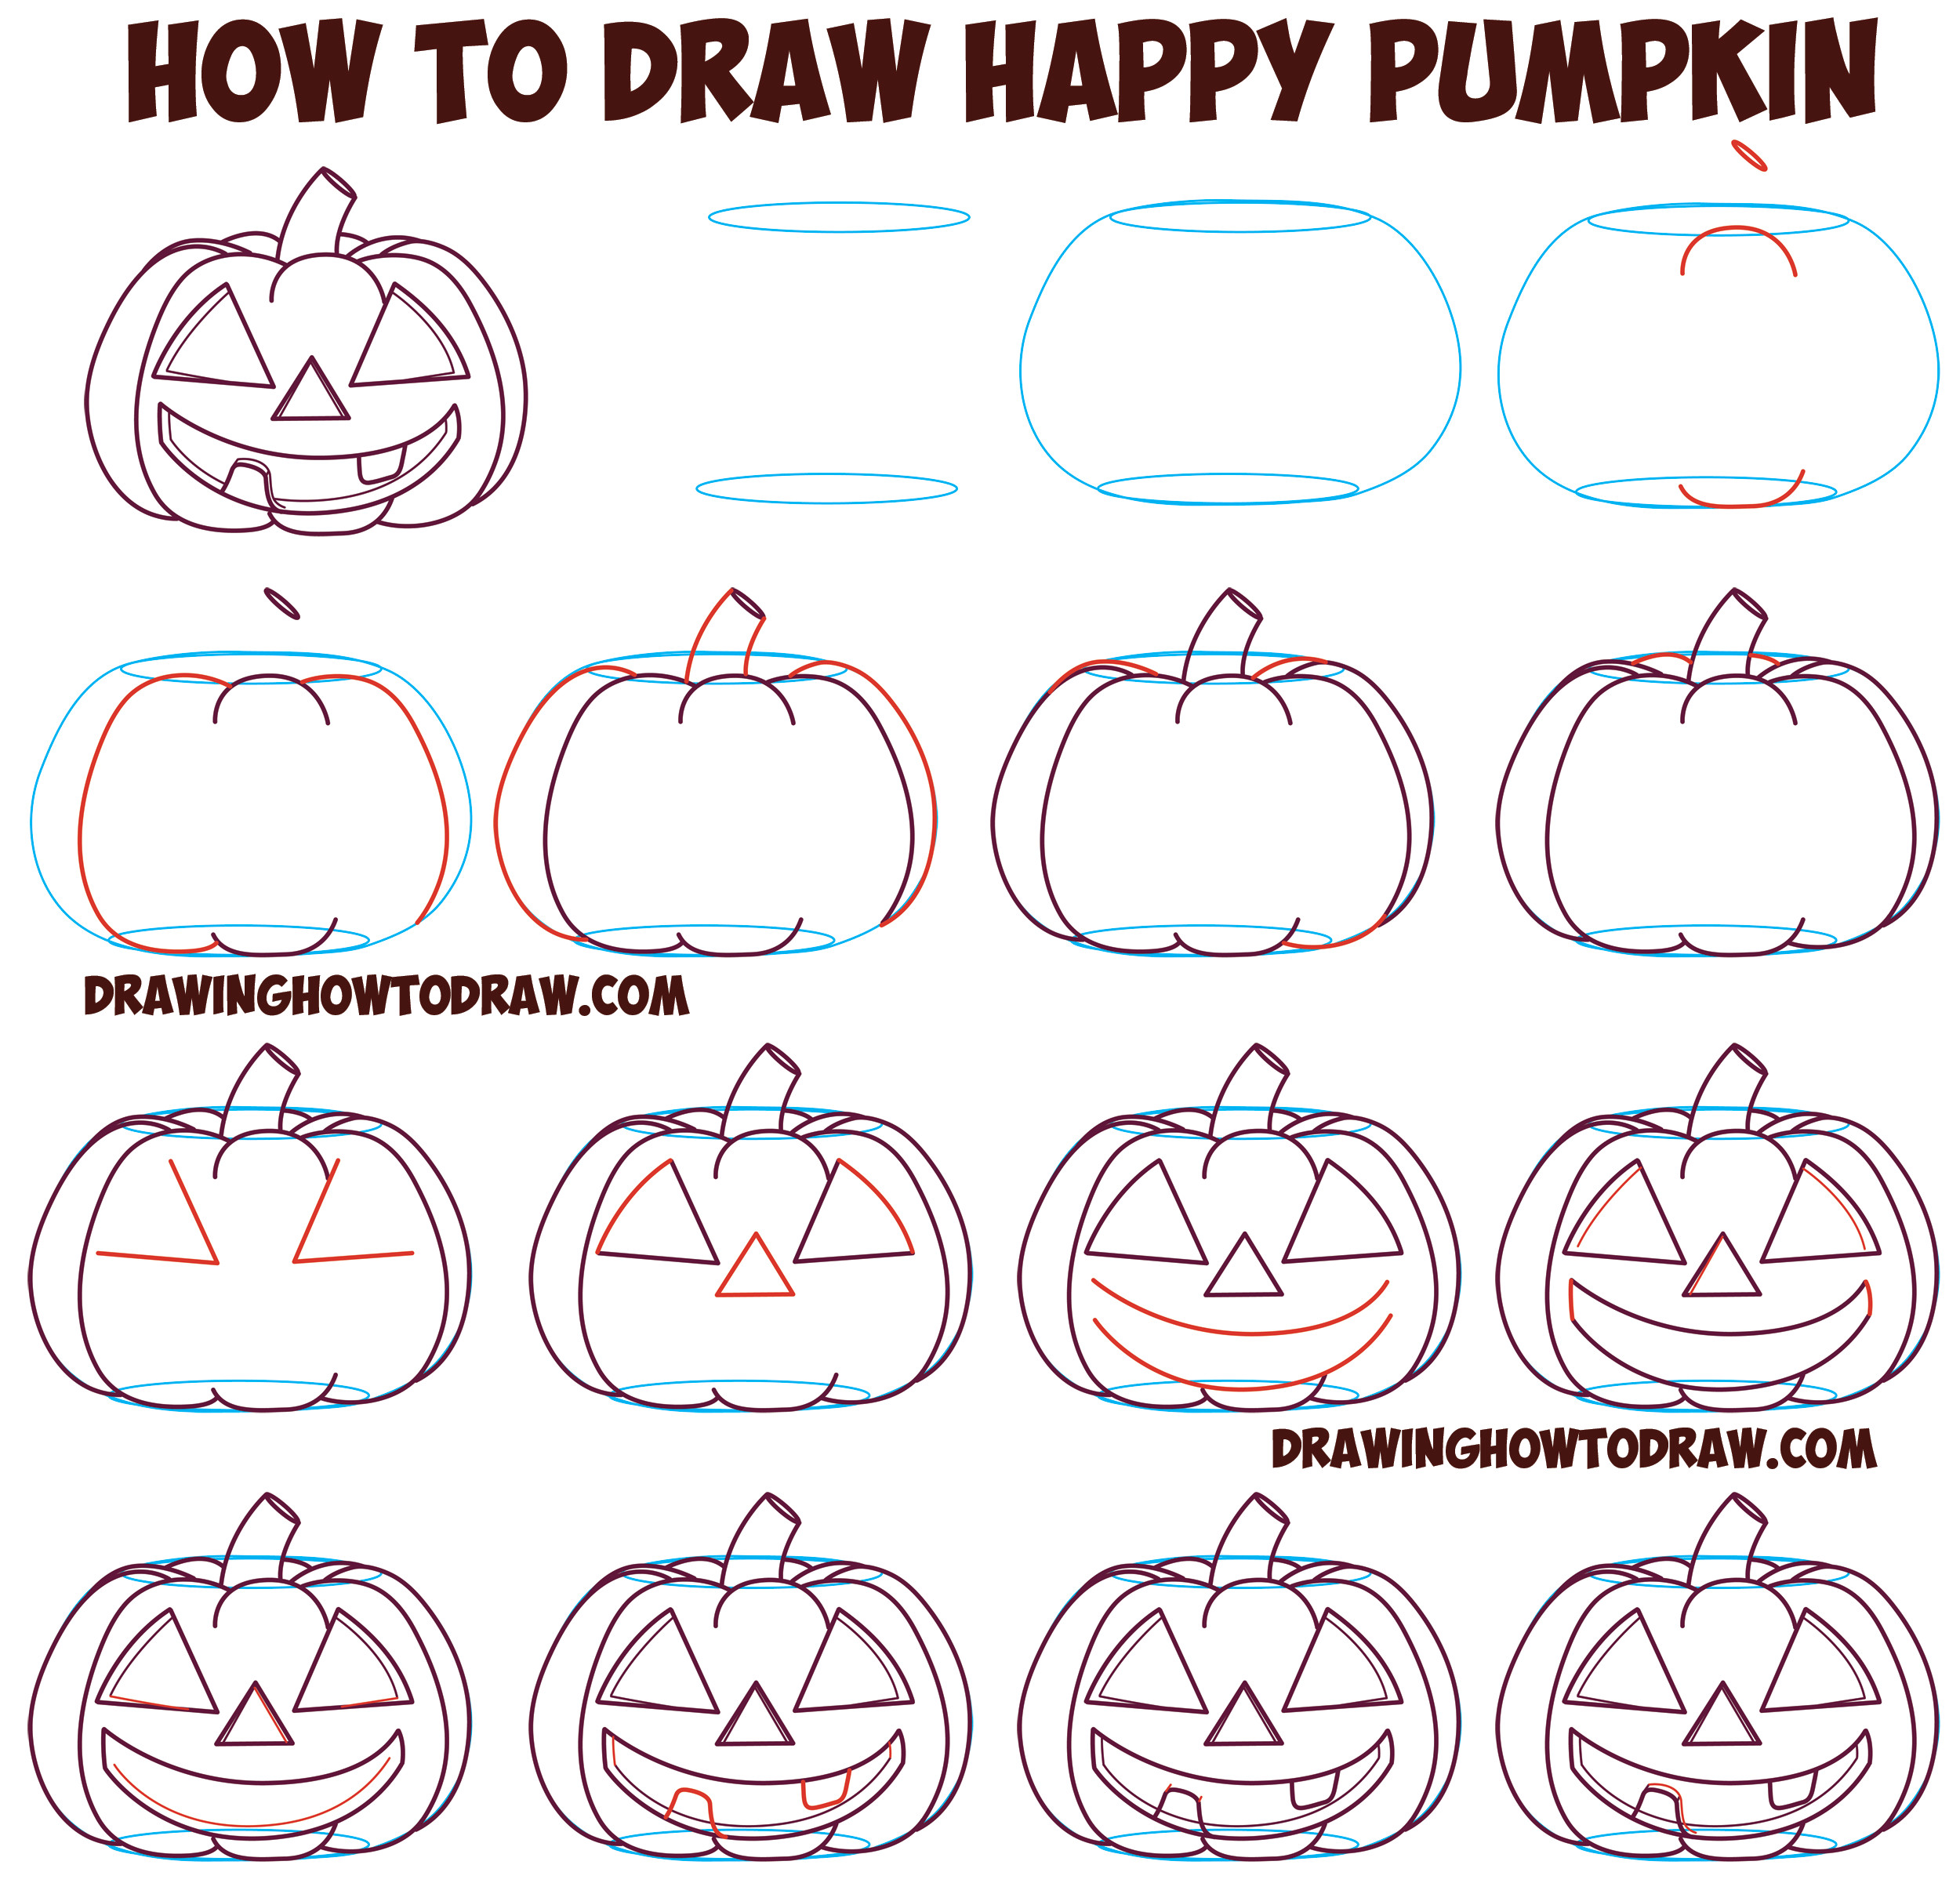 Pumpkin Faces Easy to Draw Huge Guide to Drawing Cartoon Pumpkin Faces Jack O Lantern